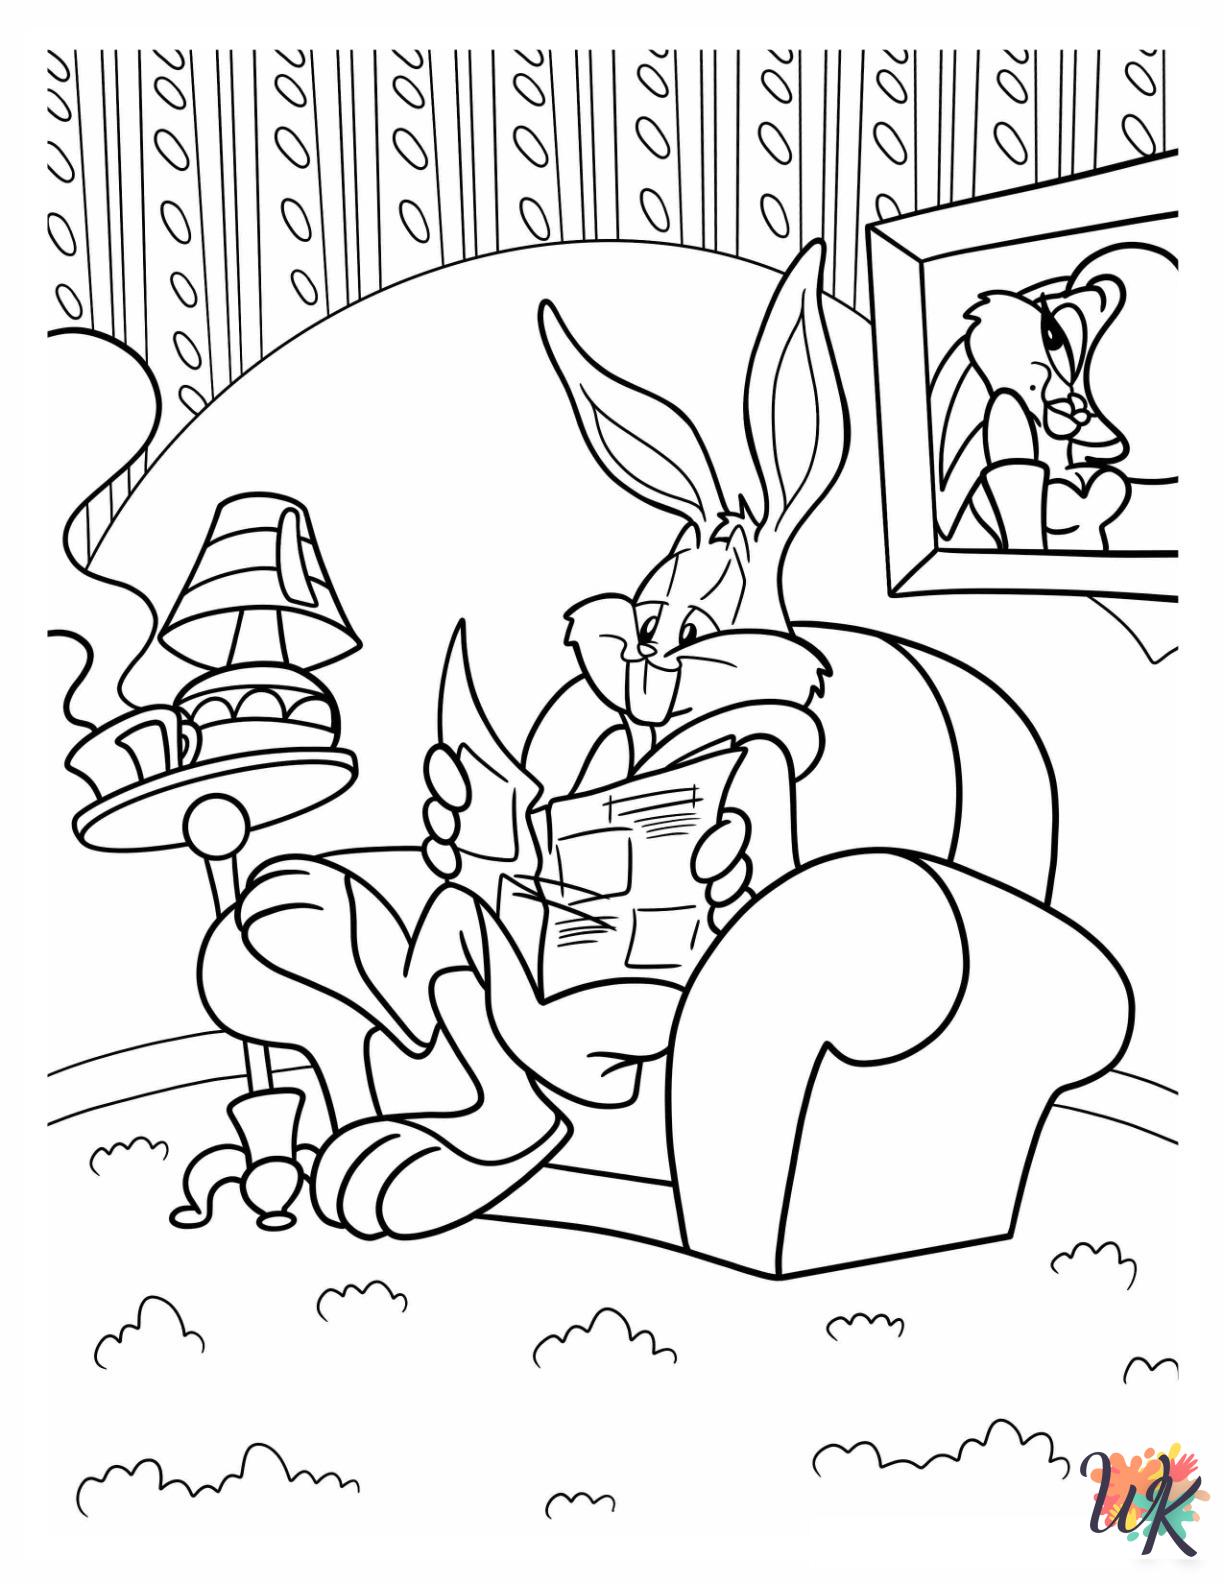 Bugs Bunny coloring pages for preschoolers